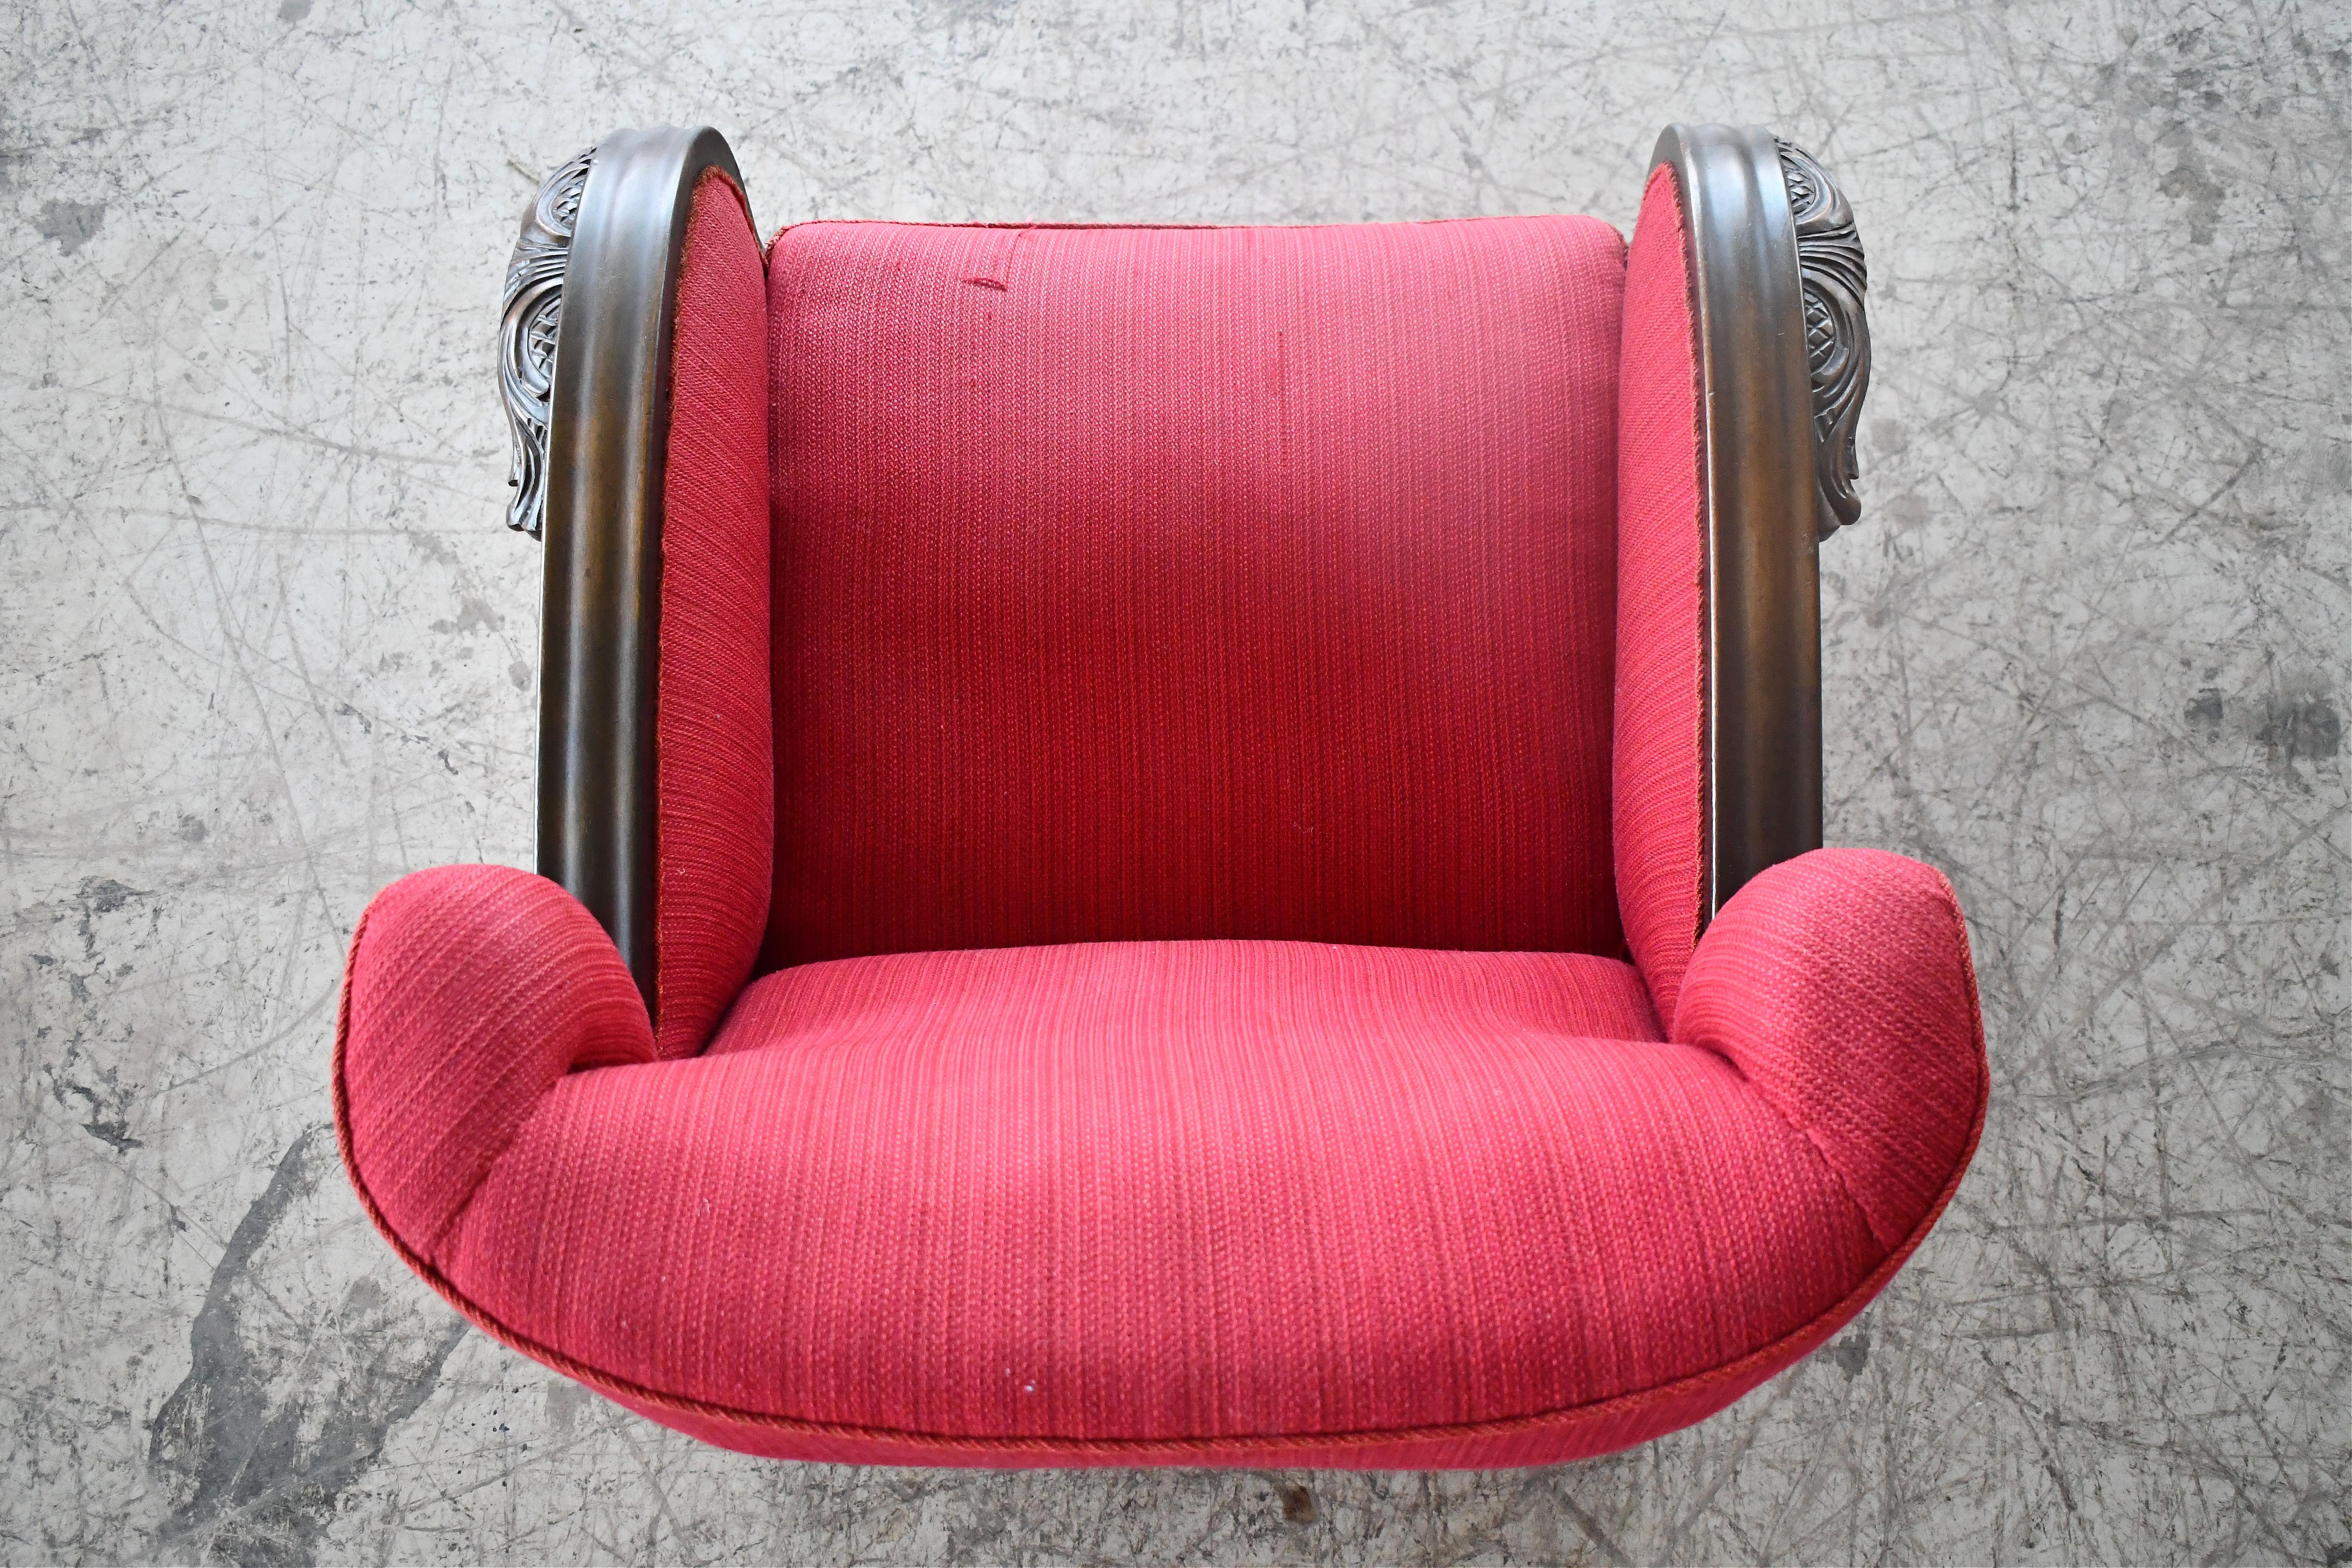 Danish 1930s Art Deco Lounge Chair in Red Mohair with Carved Armrests For Sale 5